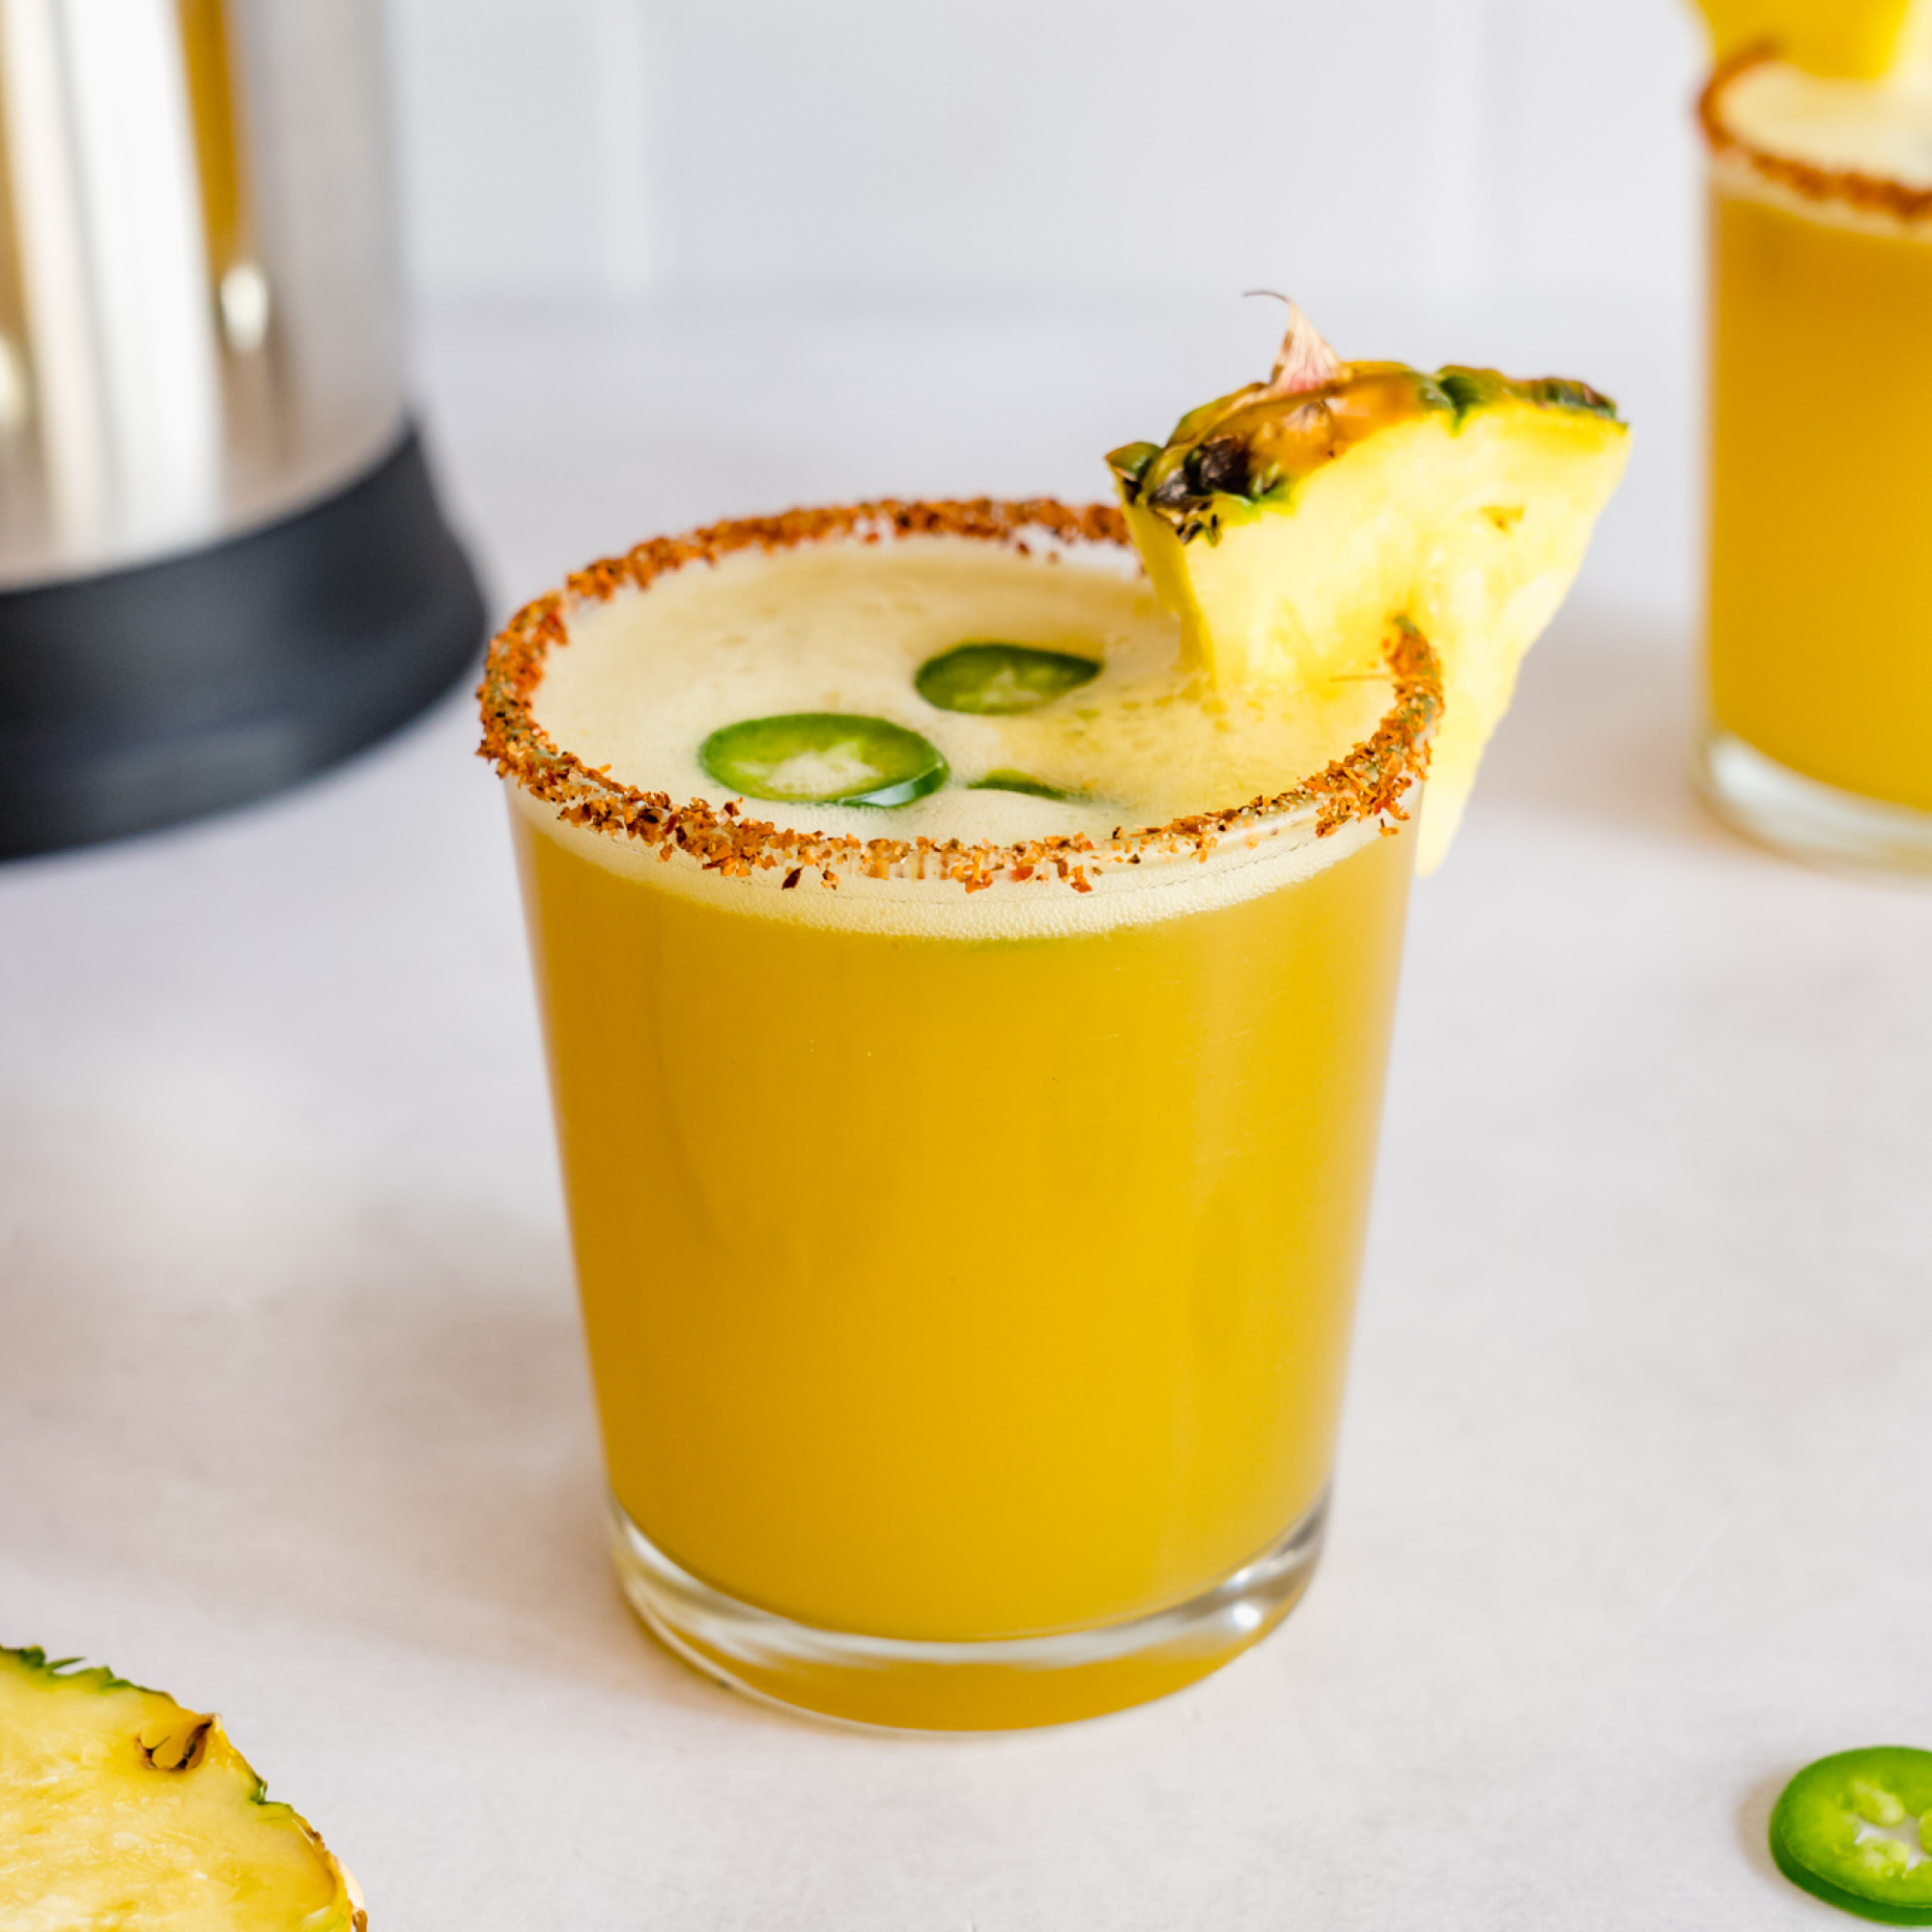 Sweet and spicy Pineapple Chili Margarita in a glass, made with Almond Cow machine